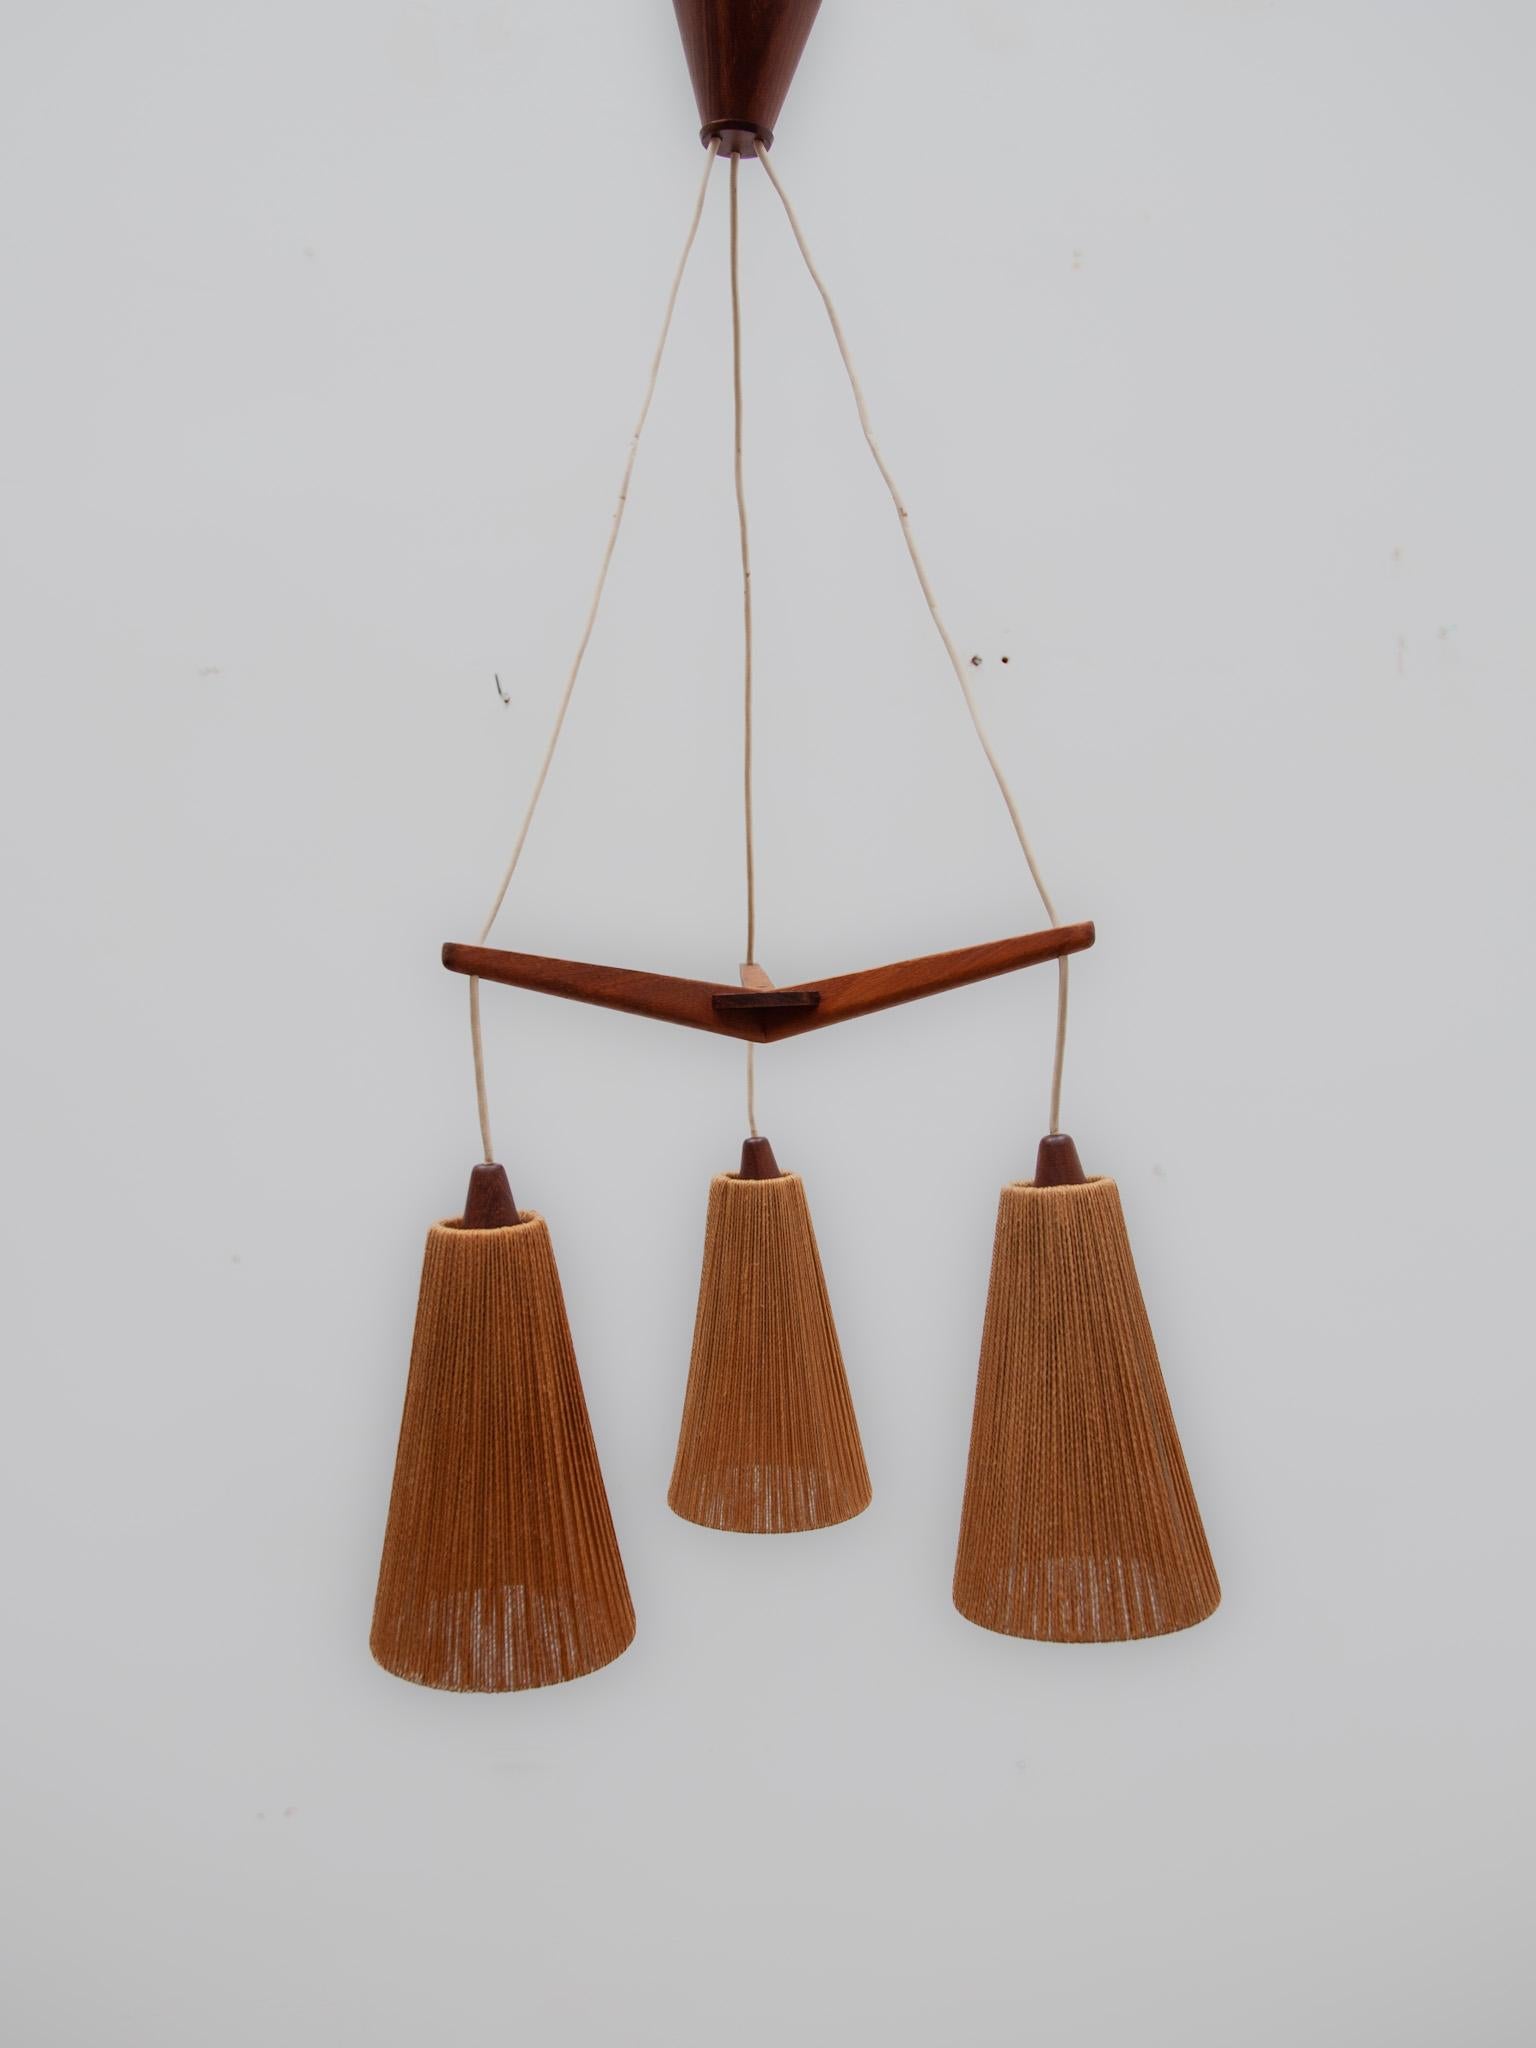 Cascading pendant lamp made of teak and cord by Temde, Germany, 1960s. Elegant Scandinavian design with a solid teak frame and cascade three cone-shaped lamp shades. The large shades lit up the lamp a timeless and natural character. The cascade lamp